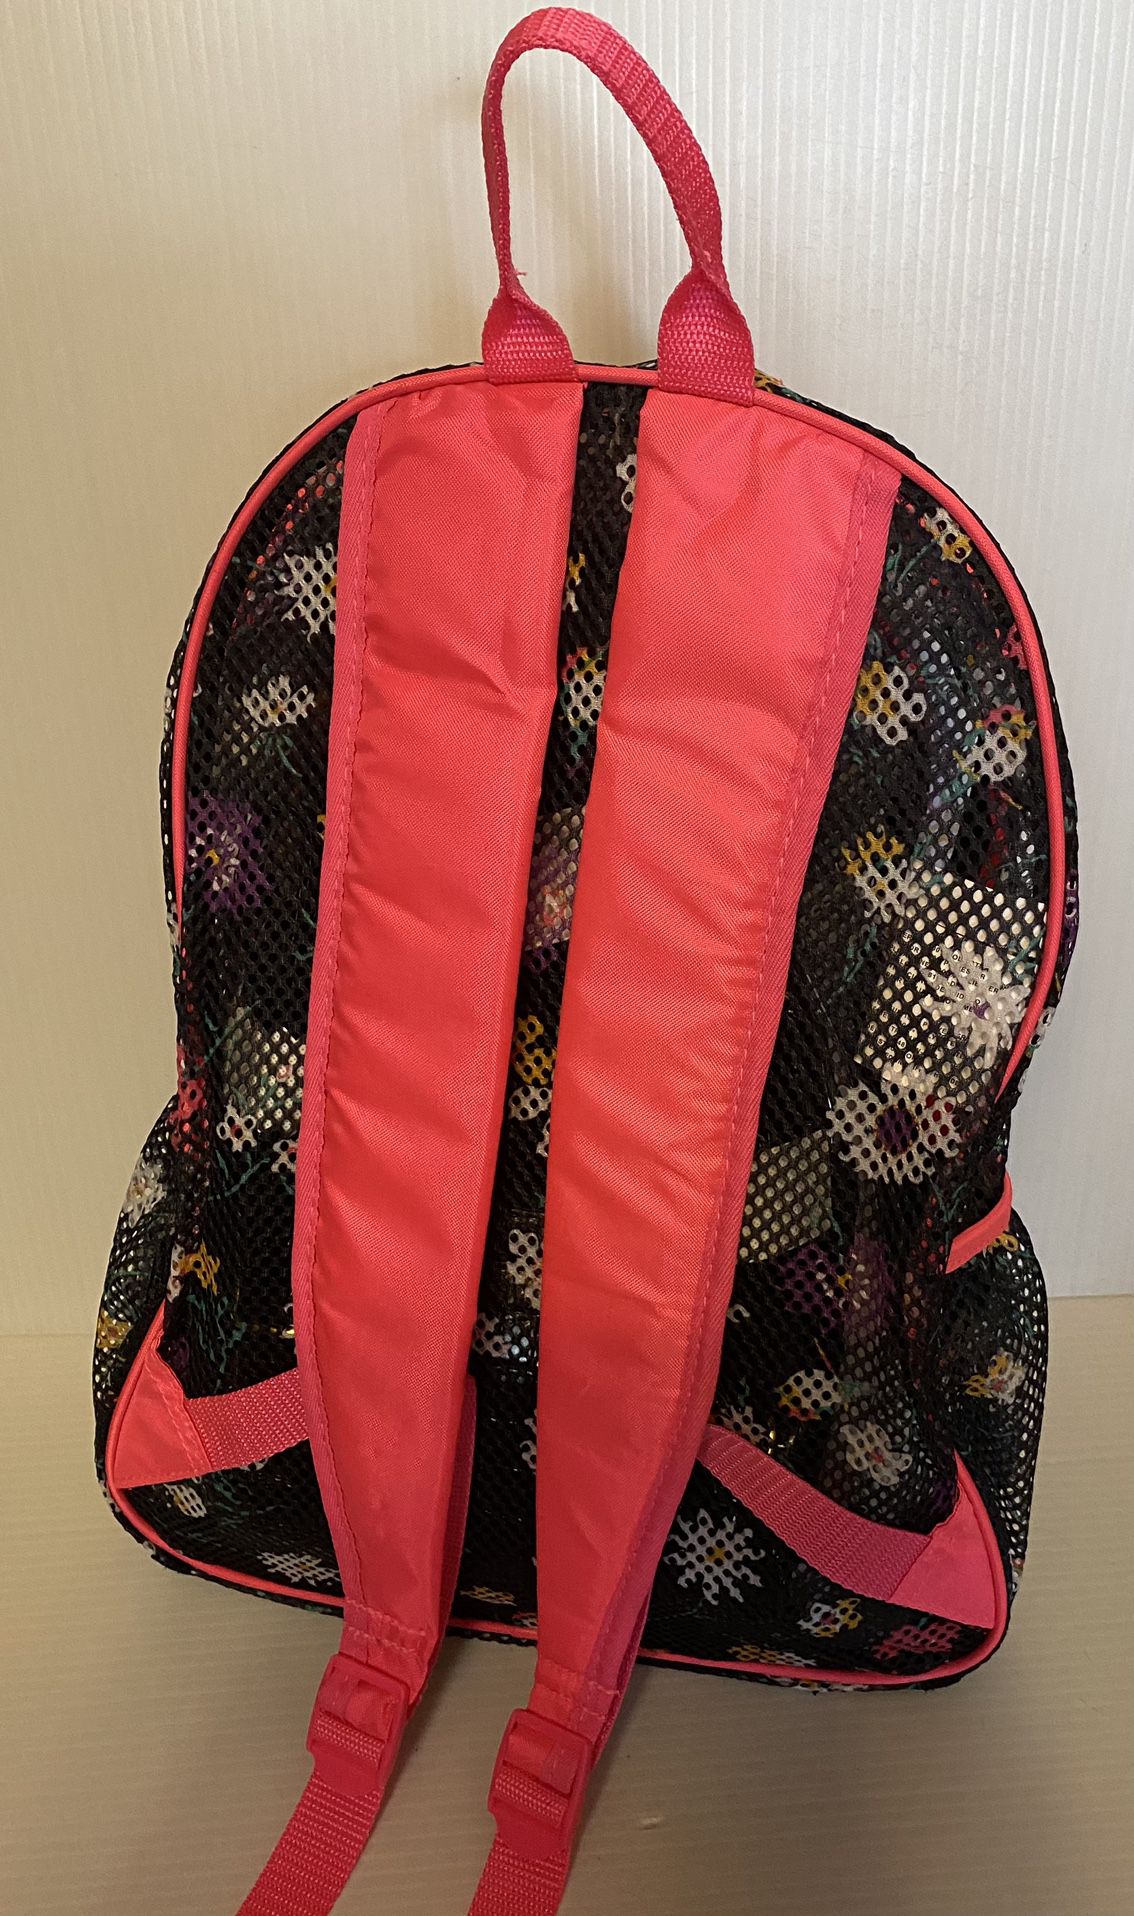 Extra Cute NEW EASTSPORT Mesh Backpack!